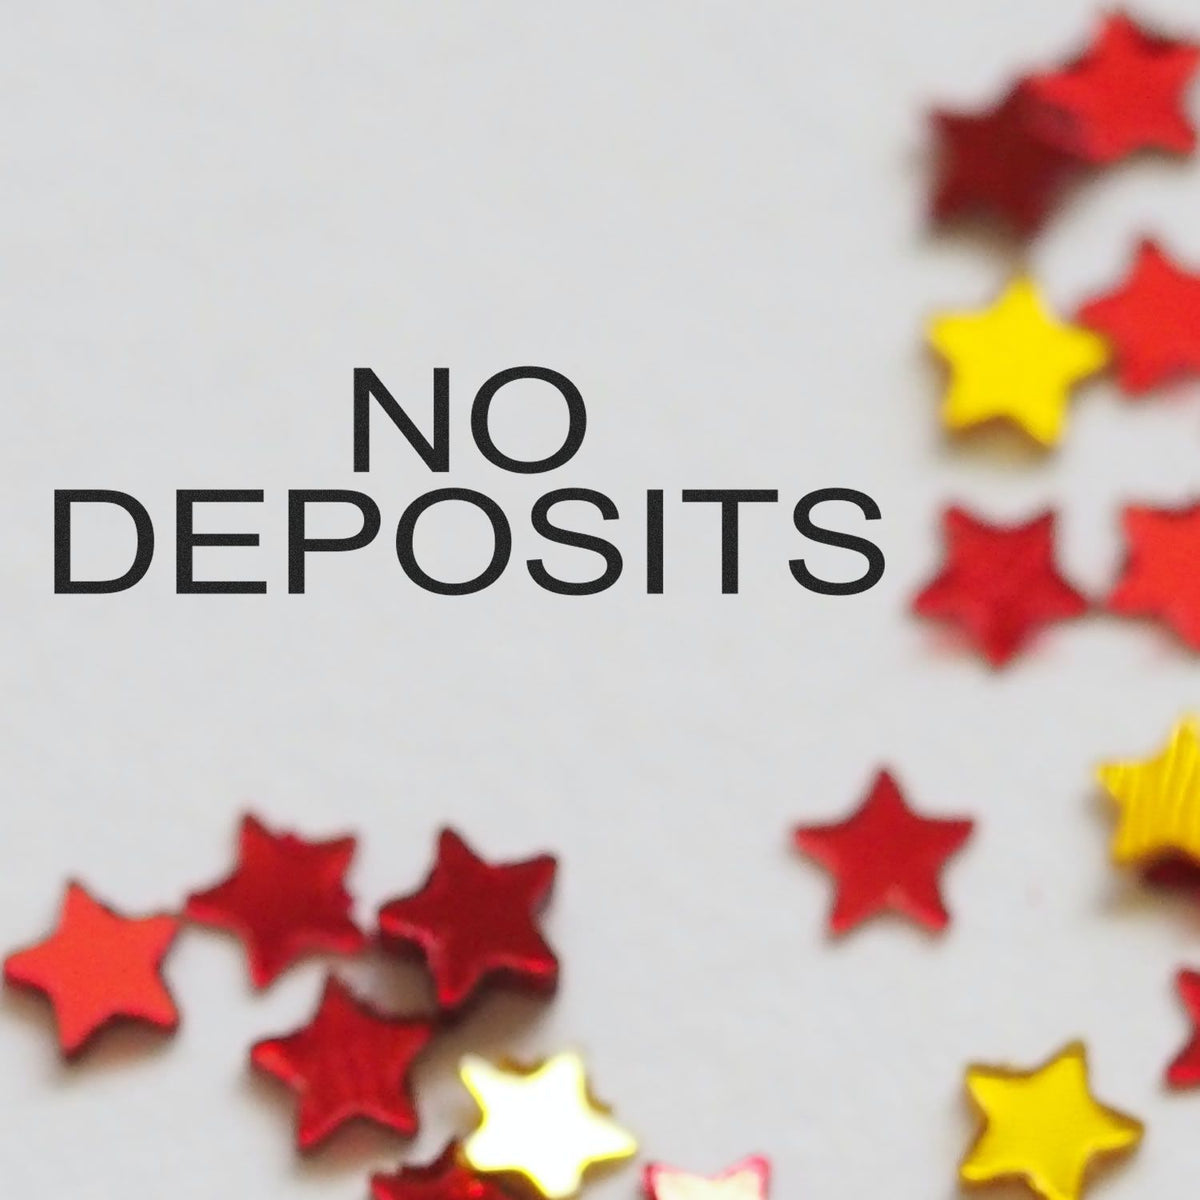 No Deposits Rubber Stamp Lifestyle Photo